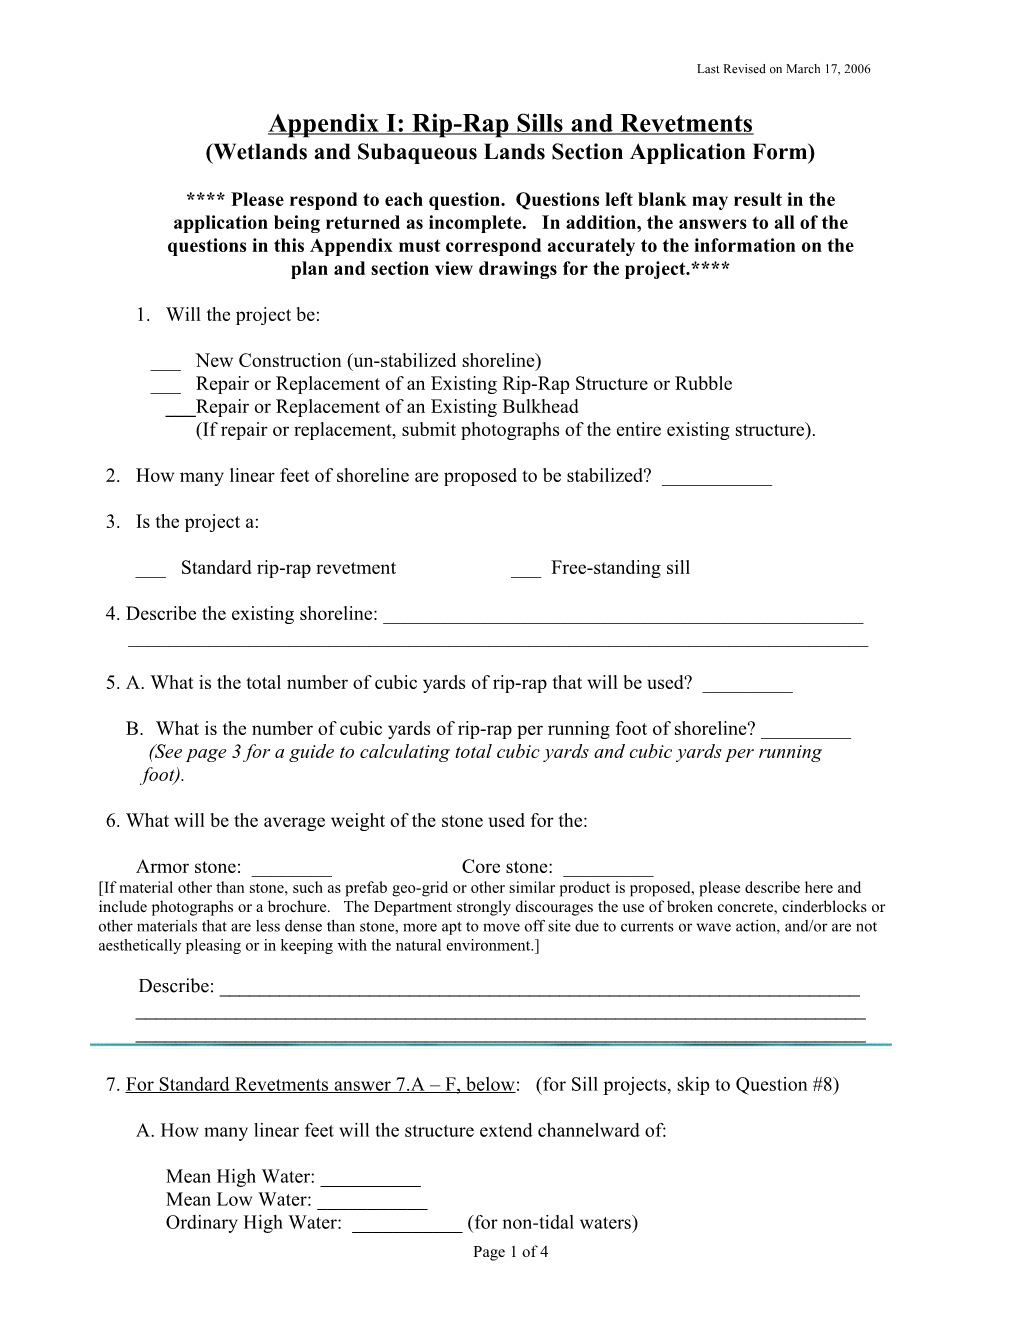 Wetlands and Subaqueous Lands Basic Application Form